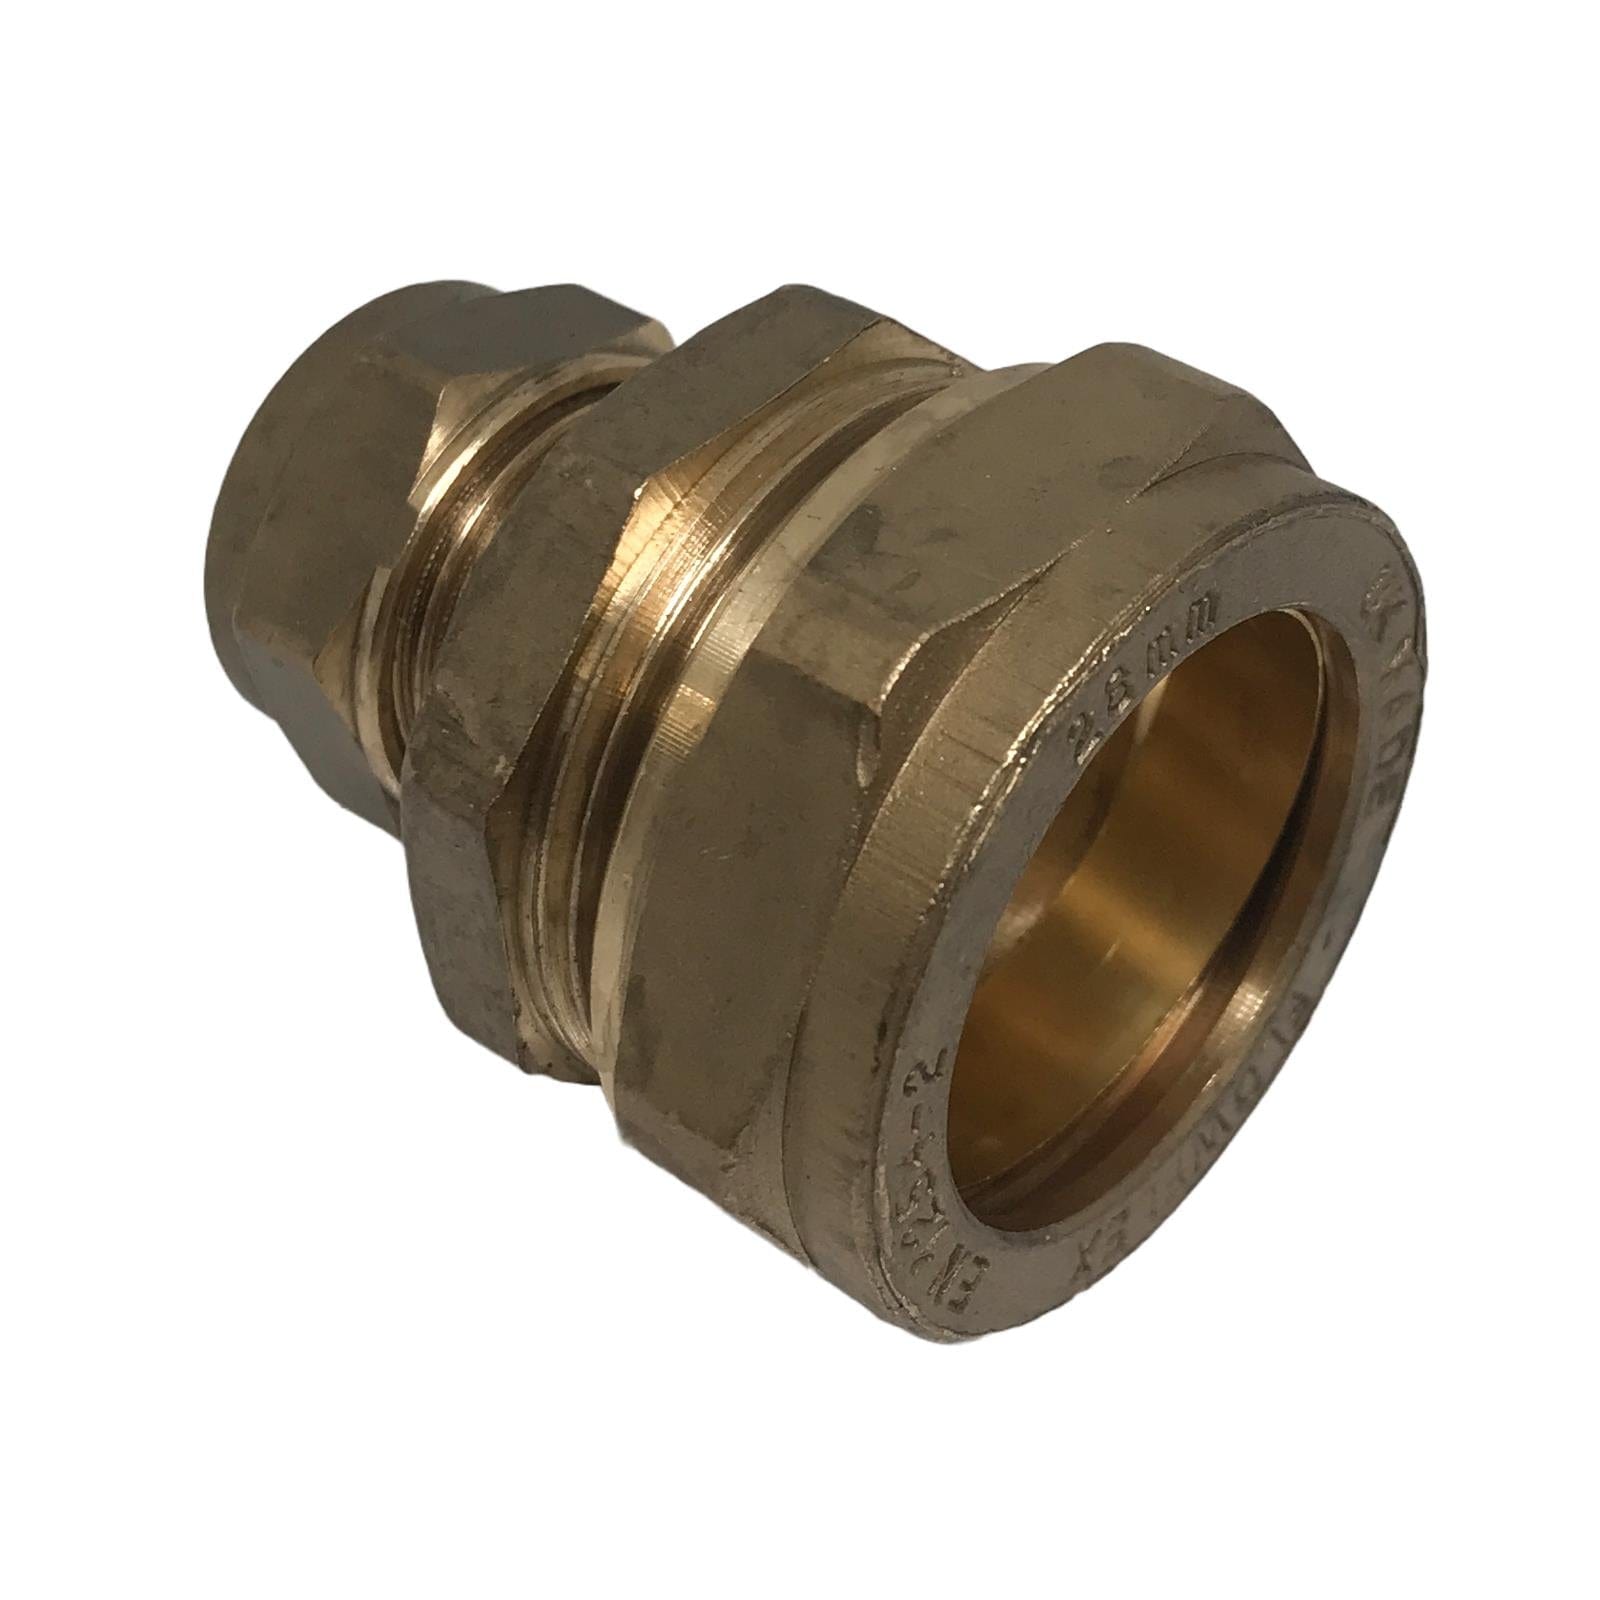 28mm x 15mm Compression Reducer Coupling Brass Compression Reducing Couplings Thunderfix 100218